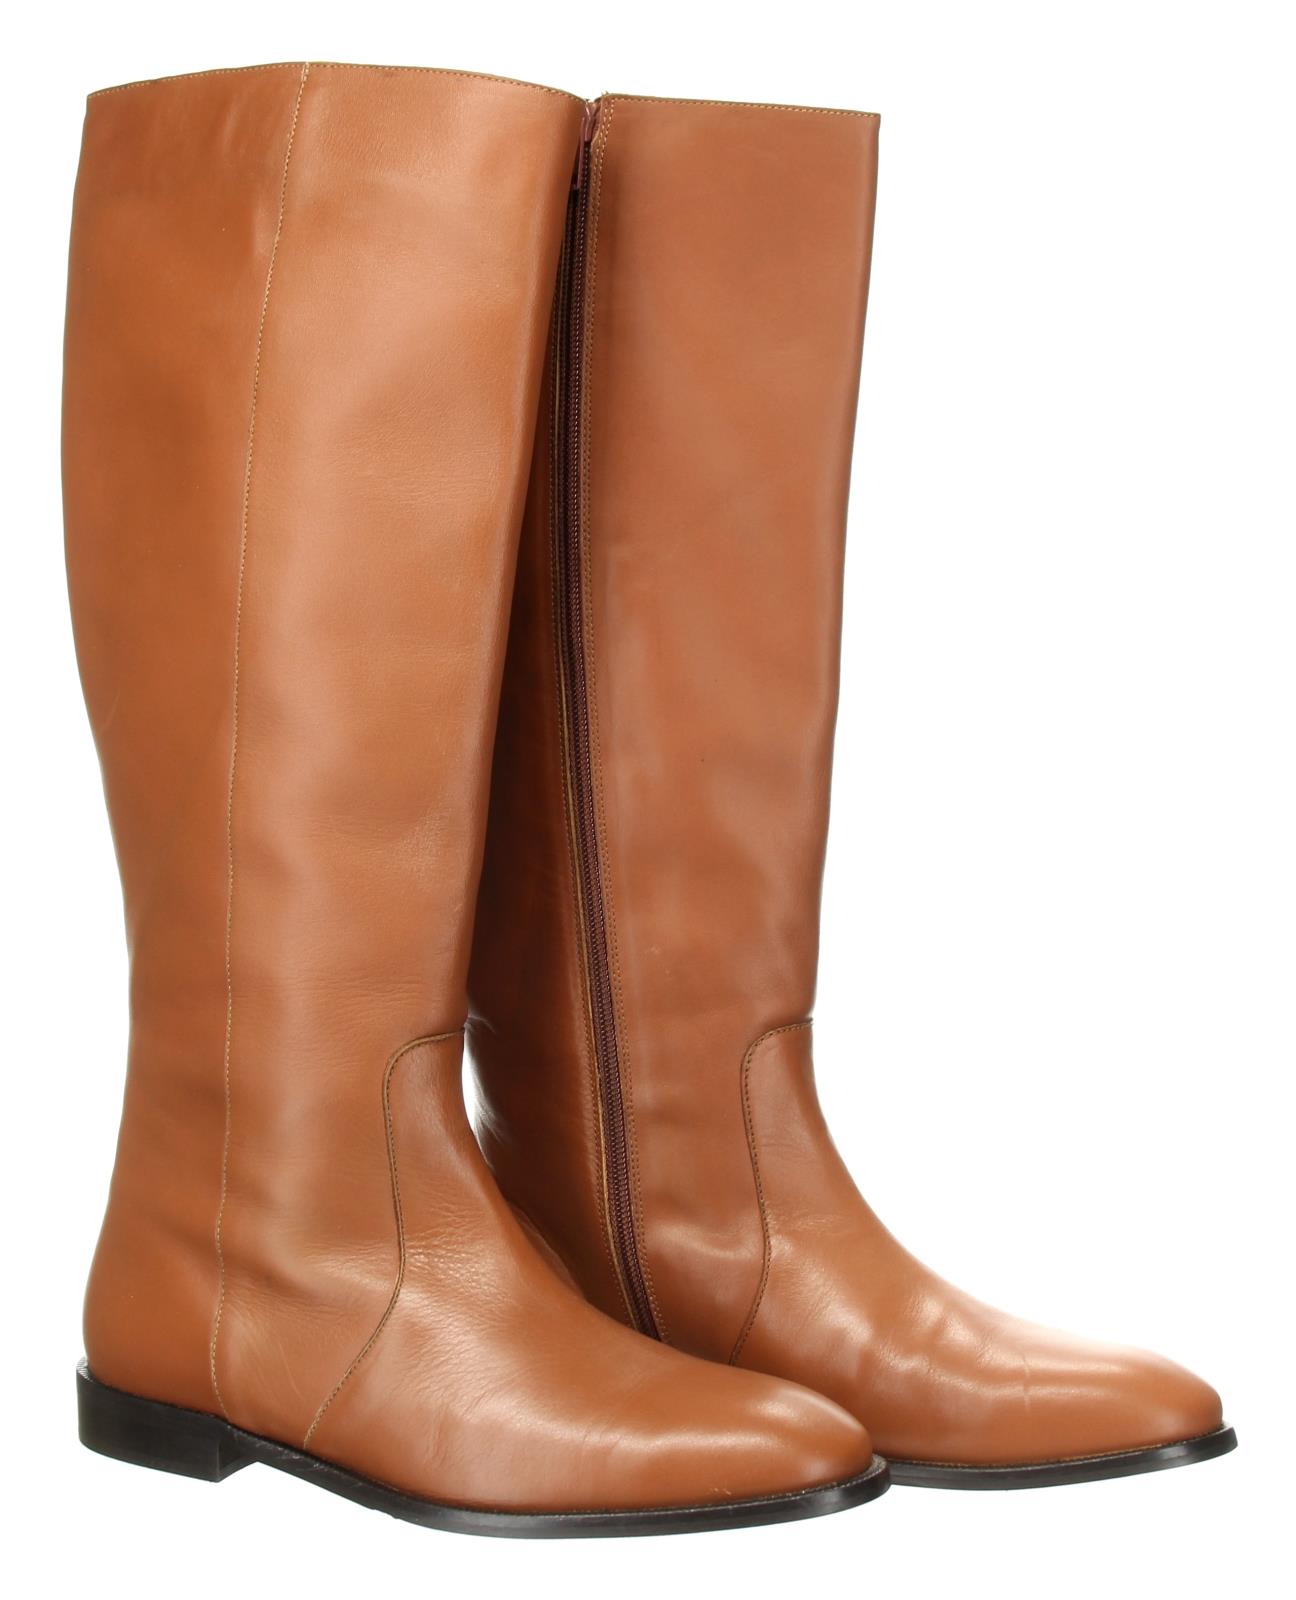 all leather riding boots